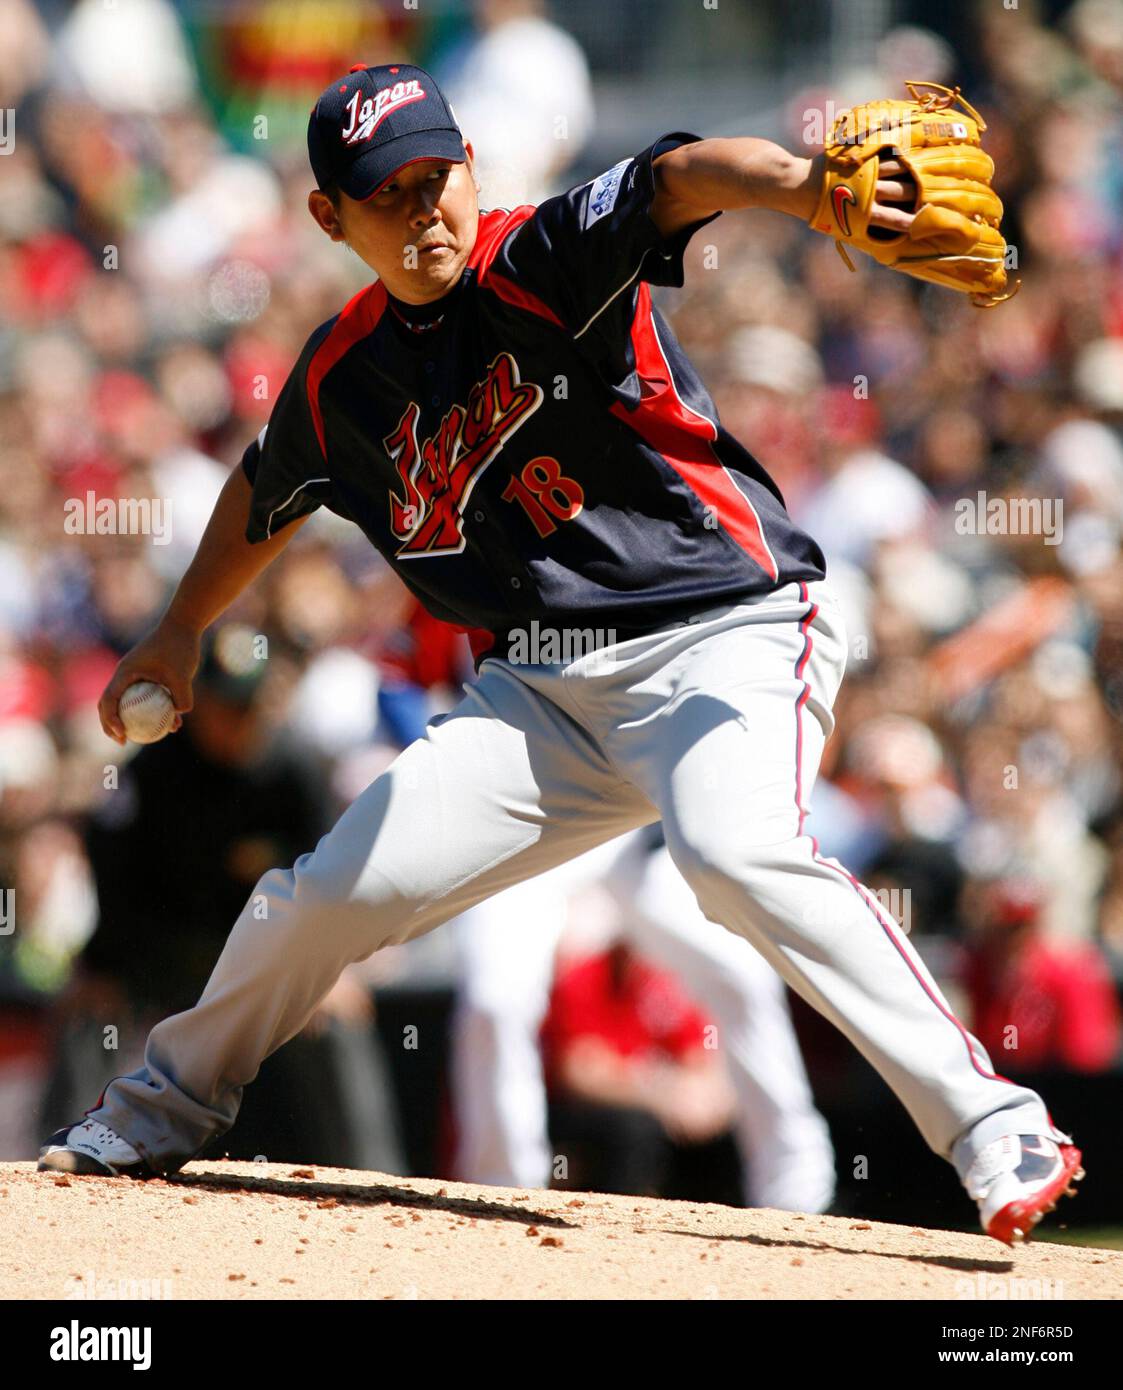 Japan starter Daisuke Matsuzaka pitches in the first inning of his start  against Cuba during their World Baseball Classic game at PETCO Park Sunday,  March 15, 2009,in San Diego. (AP Photo/Denis Poroy